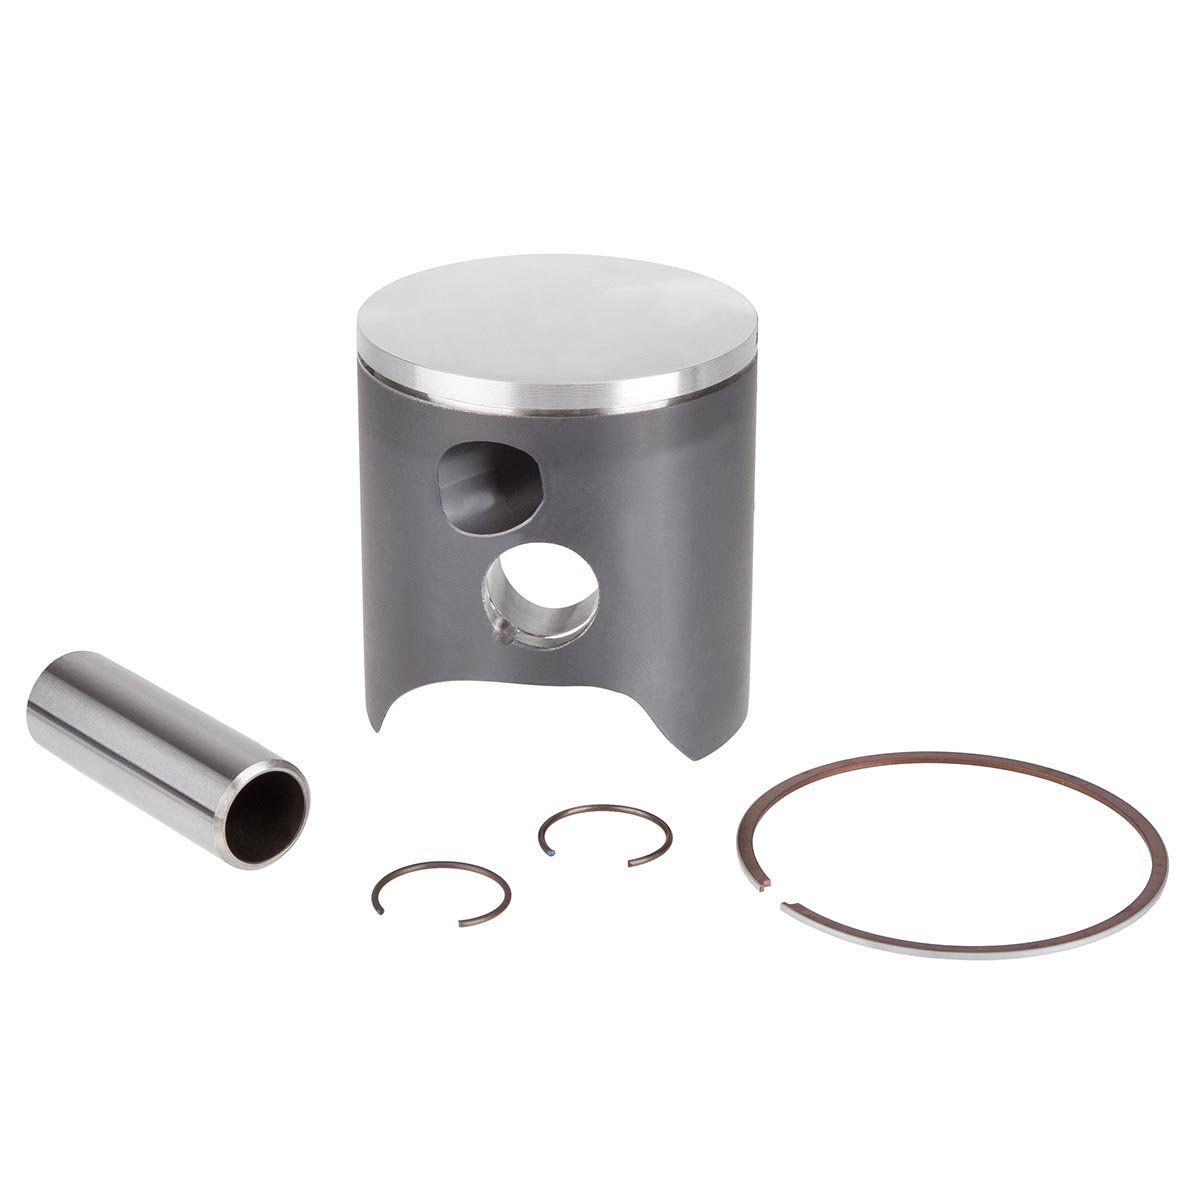 Wiseco Yamaha YZ250 YZ 250 PISTON TOP END KIT 67mm .6mm OVER BORE 2002-2015